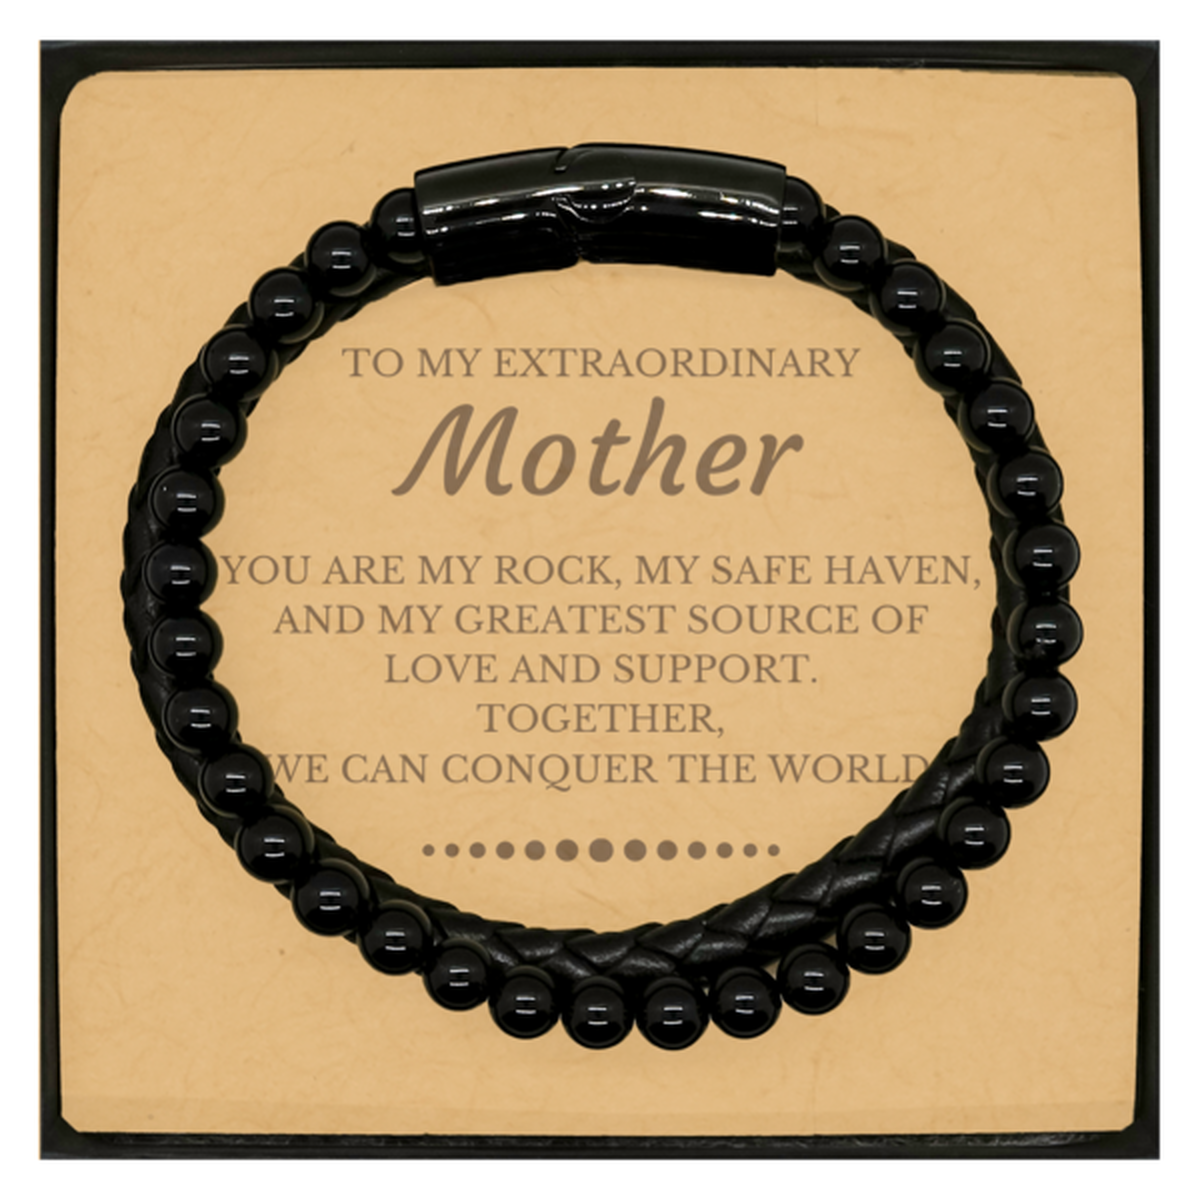 To My Extraordinary Mother Gifts, Together, we can conquer the world, Birthday Christmas Stone Leather Bracelets For Mother, Christmas Gifts For Mother